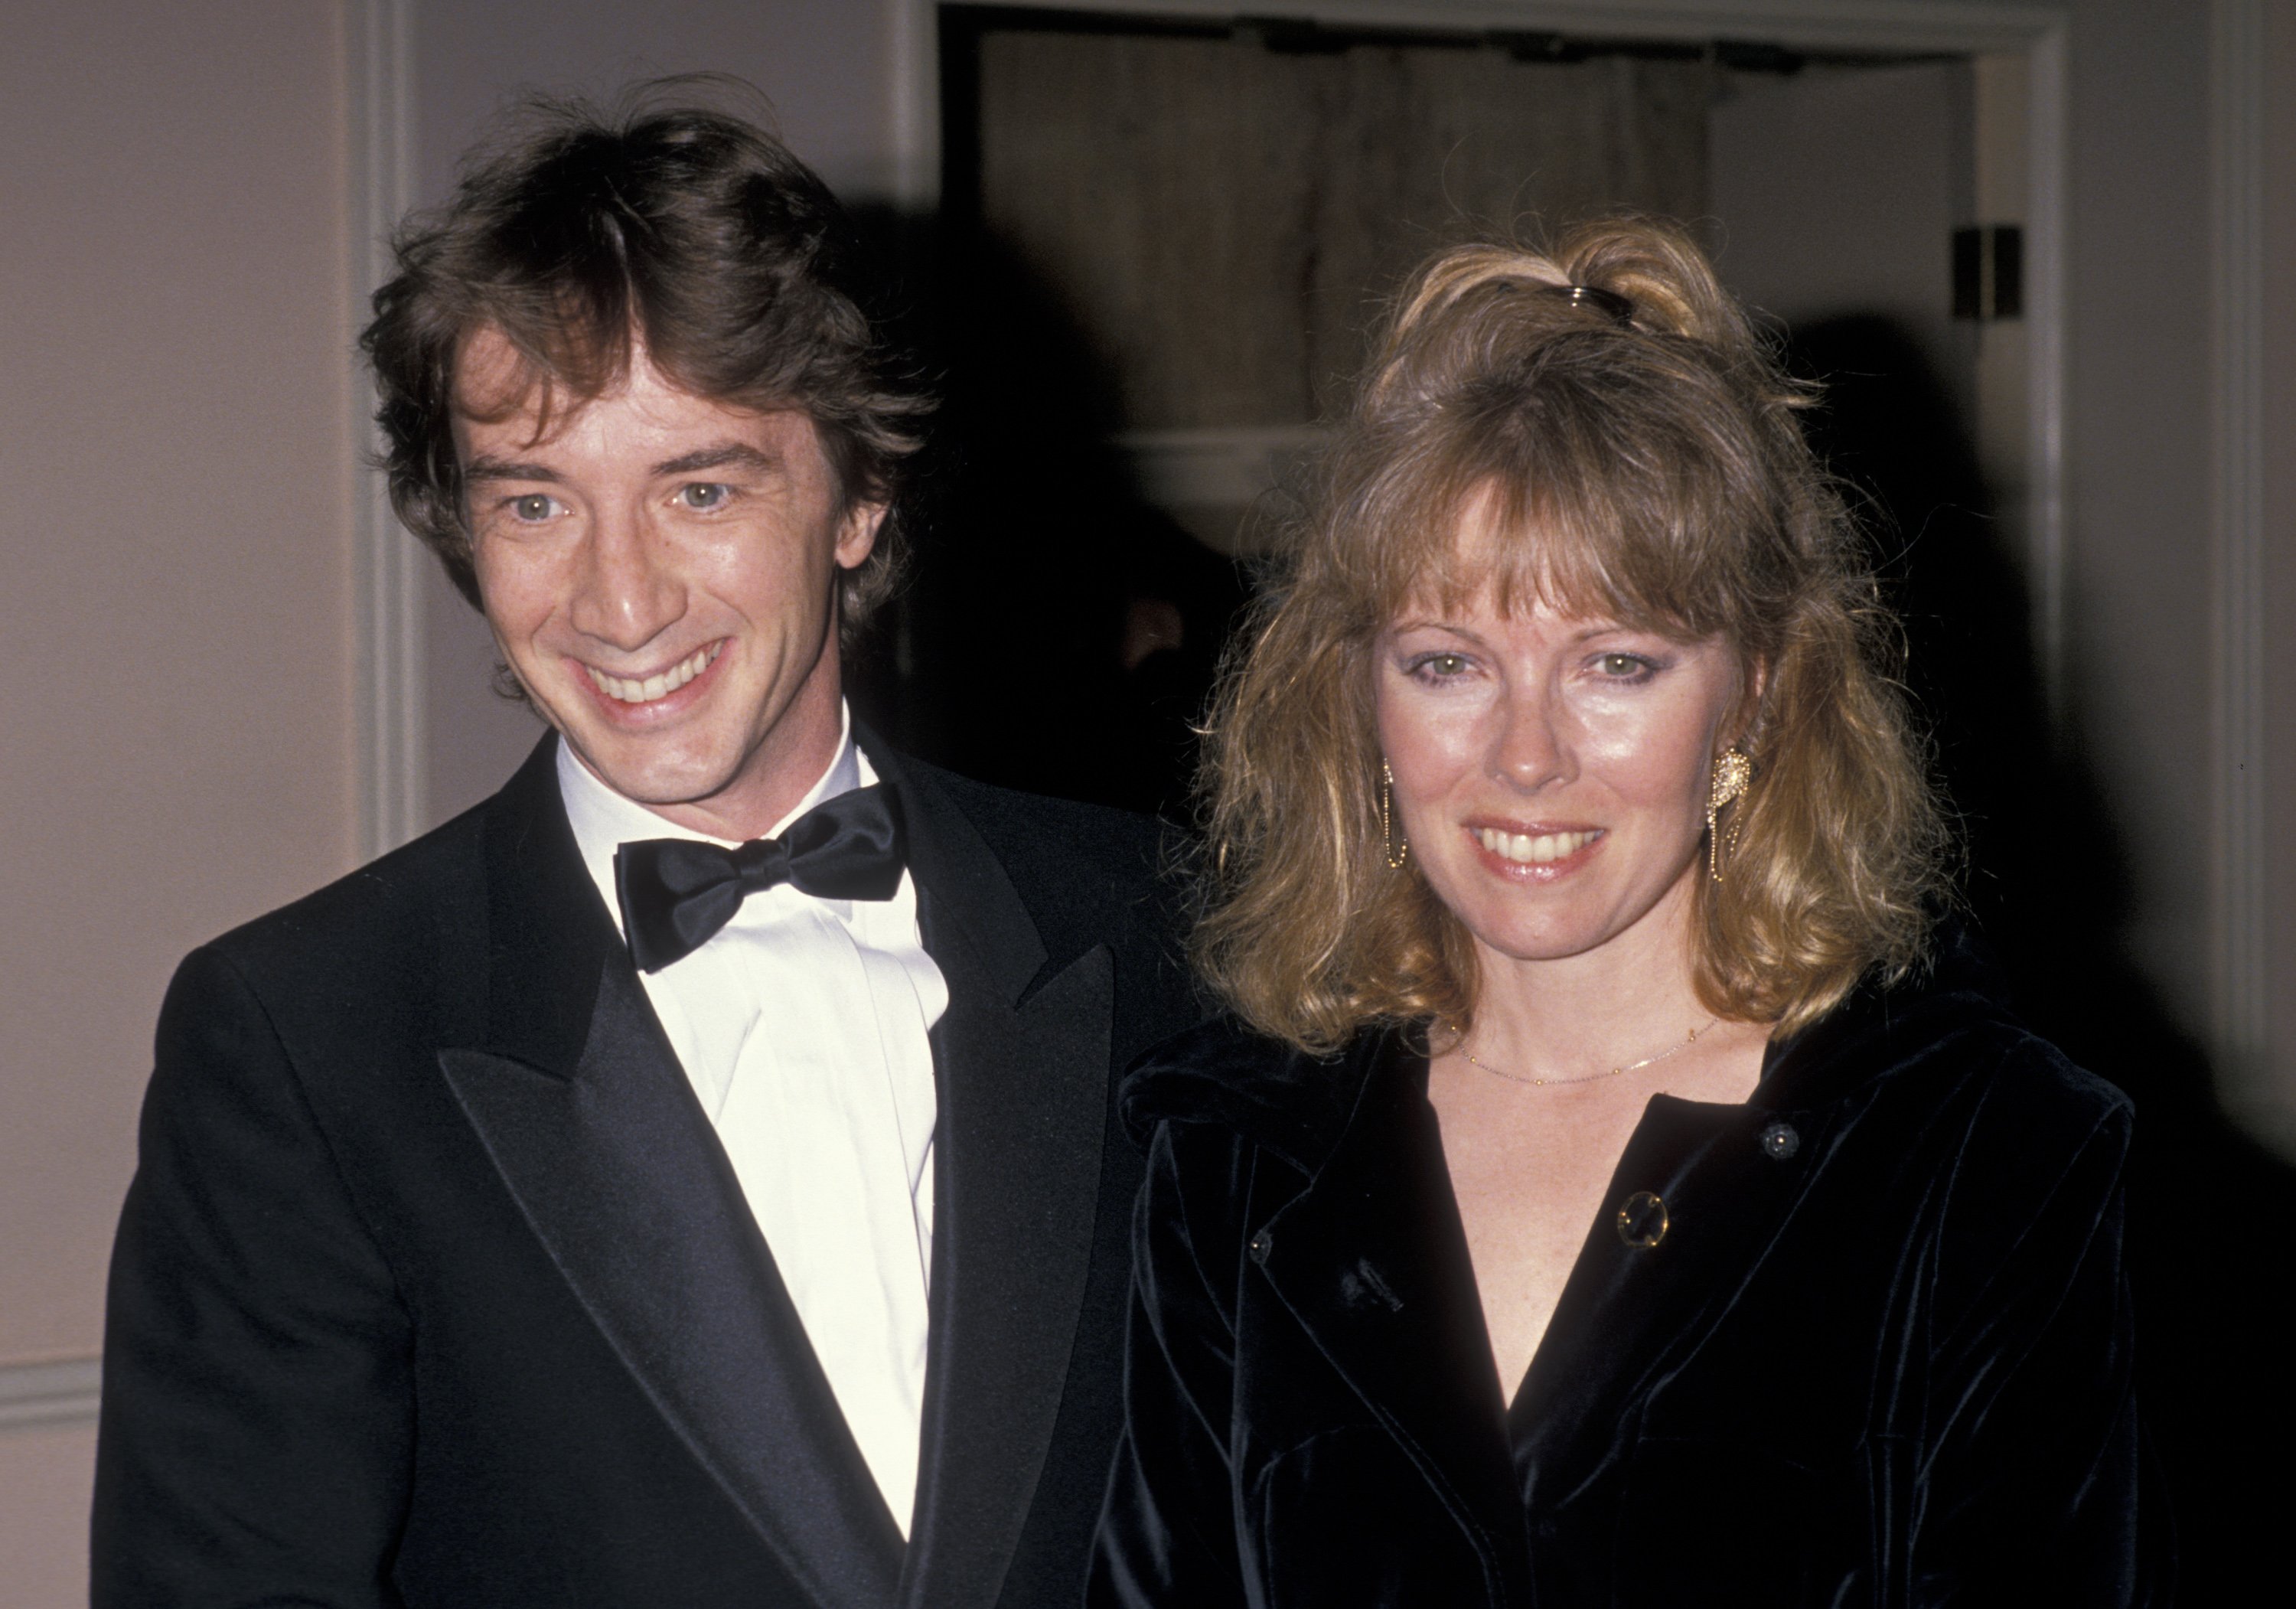  Martin Short and wife Nancy Dolman attending 17th Annual American Film Institute Lifetime Achievement Awards on March 9, 1989 | Source: Getty Images